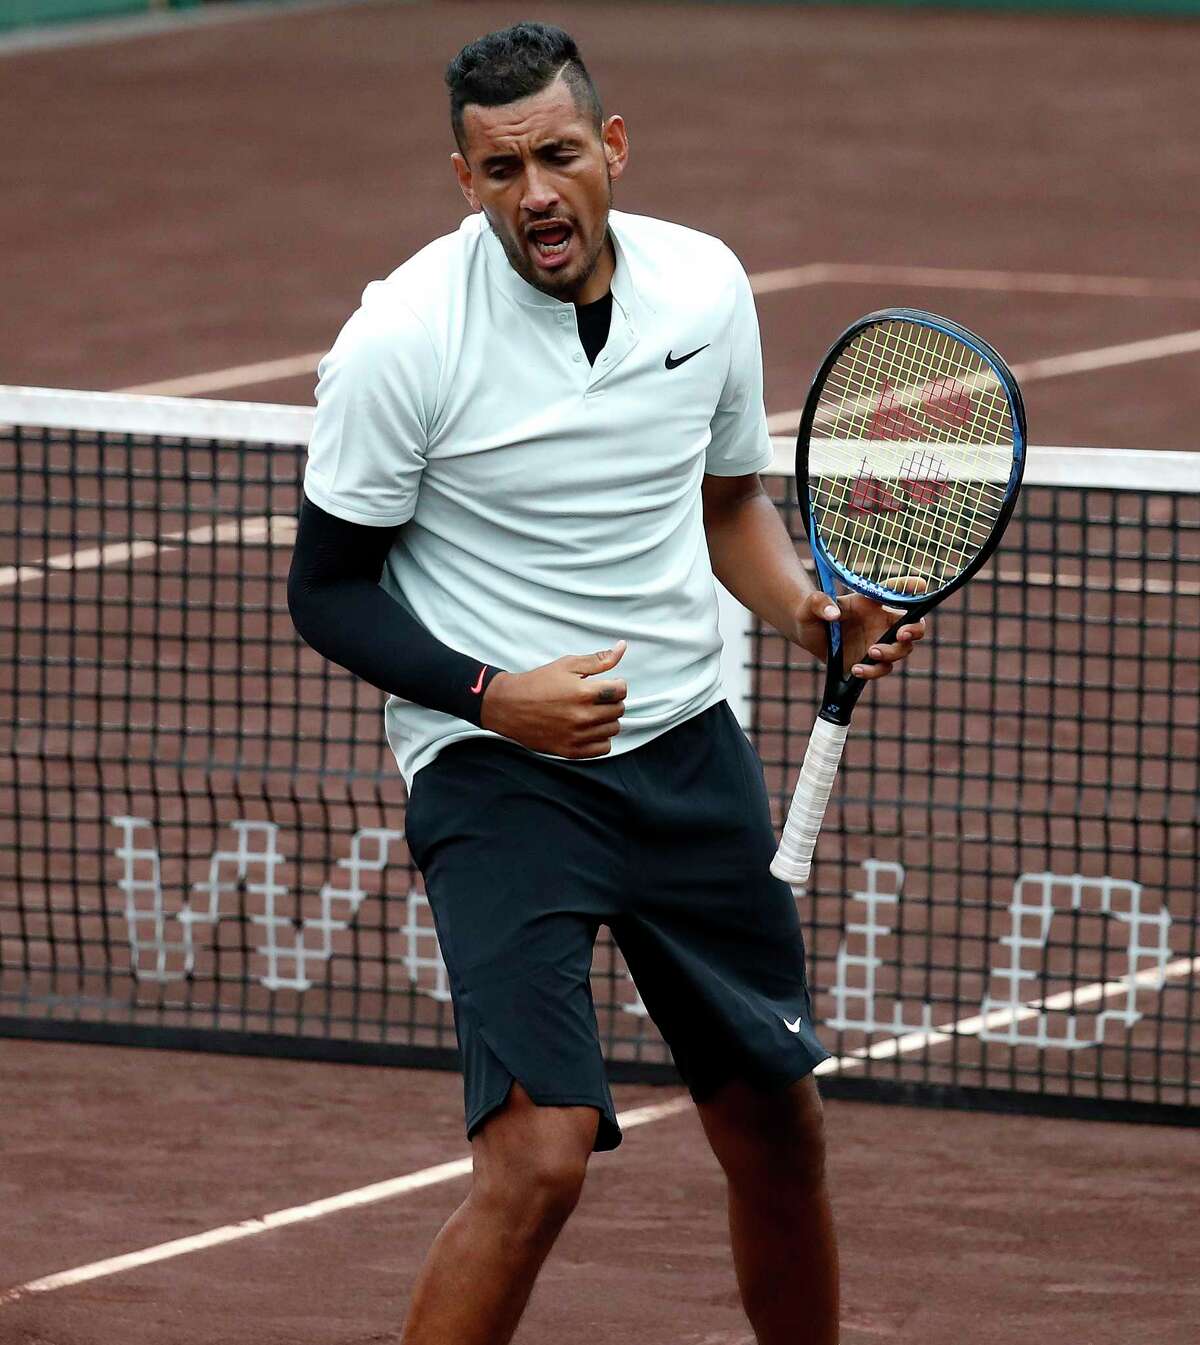 Nick Kyrgios reacts in the first round of doubles with Matt Reid during the U.S. Men's Clay Court Championship at River Oaks Country Club, Monday, April 9, 2018, in Houston.